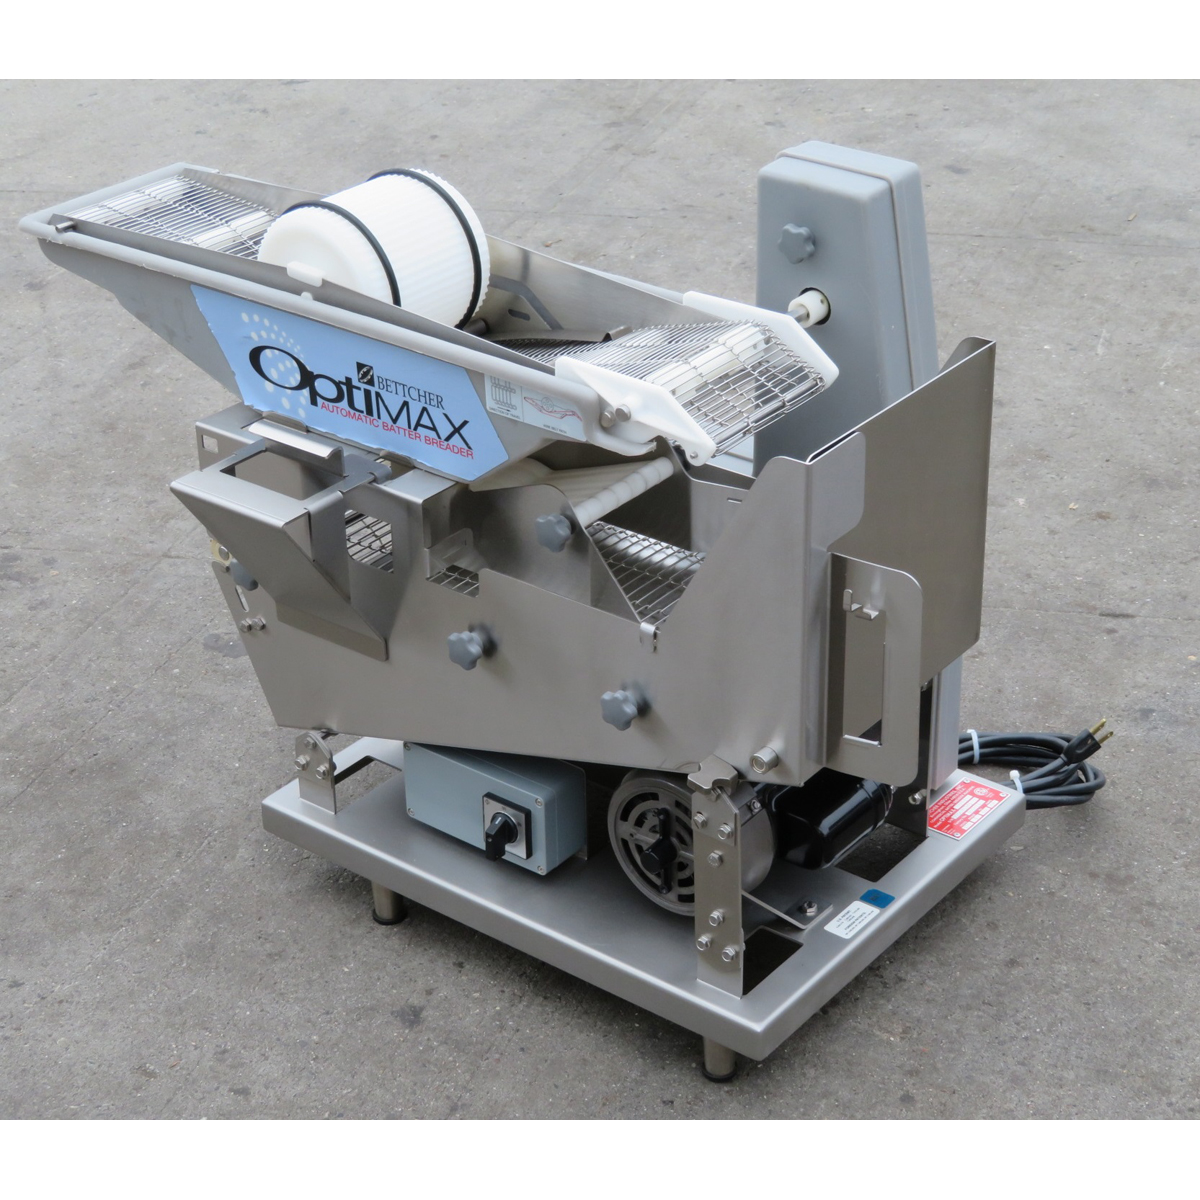 Bettcher BB-1 Optimax Breading Machine, Used As a Demo